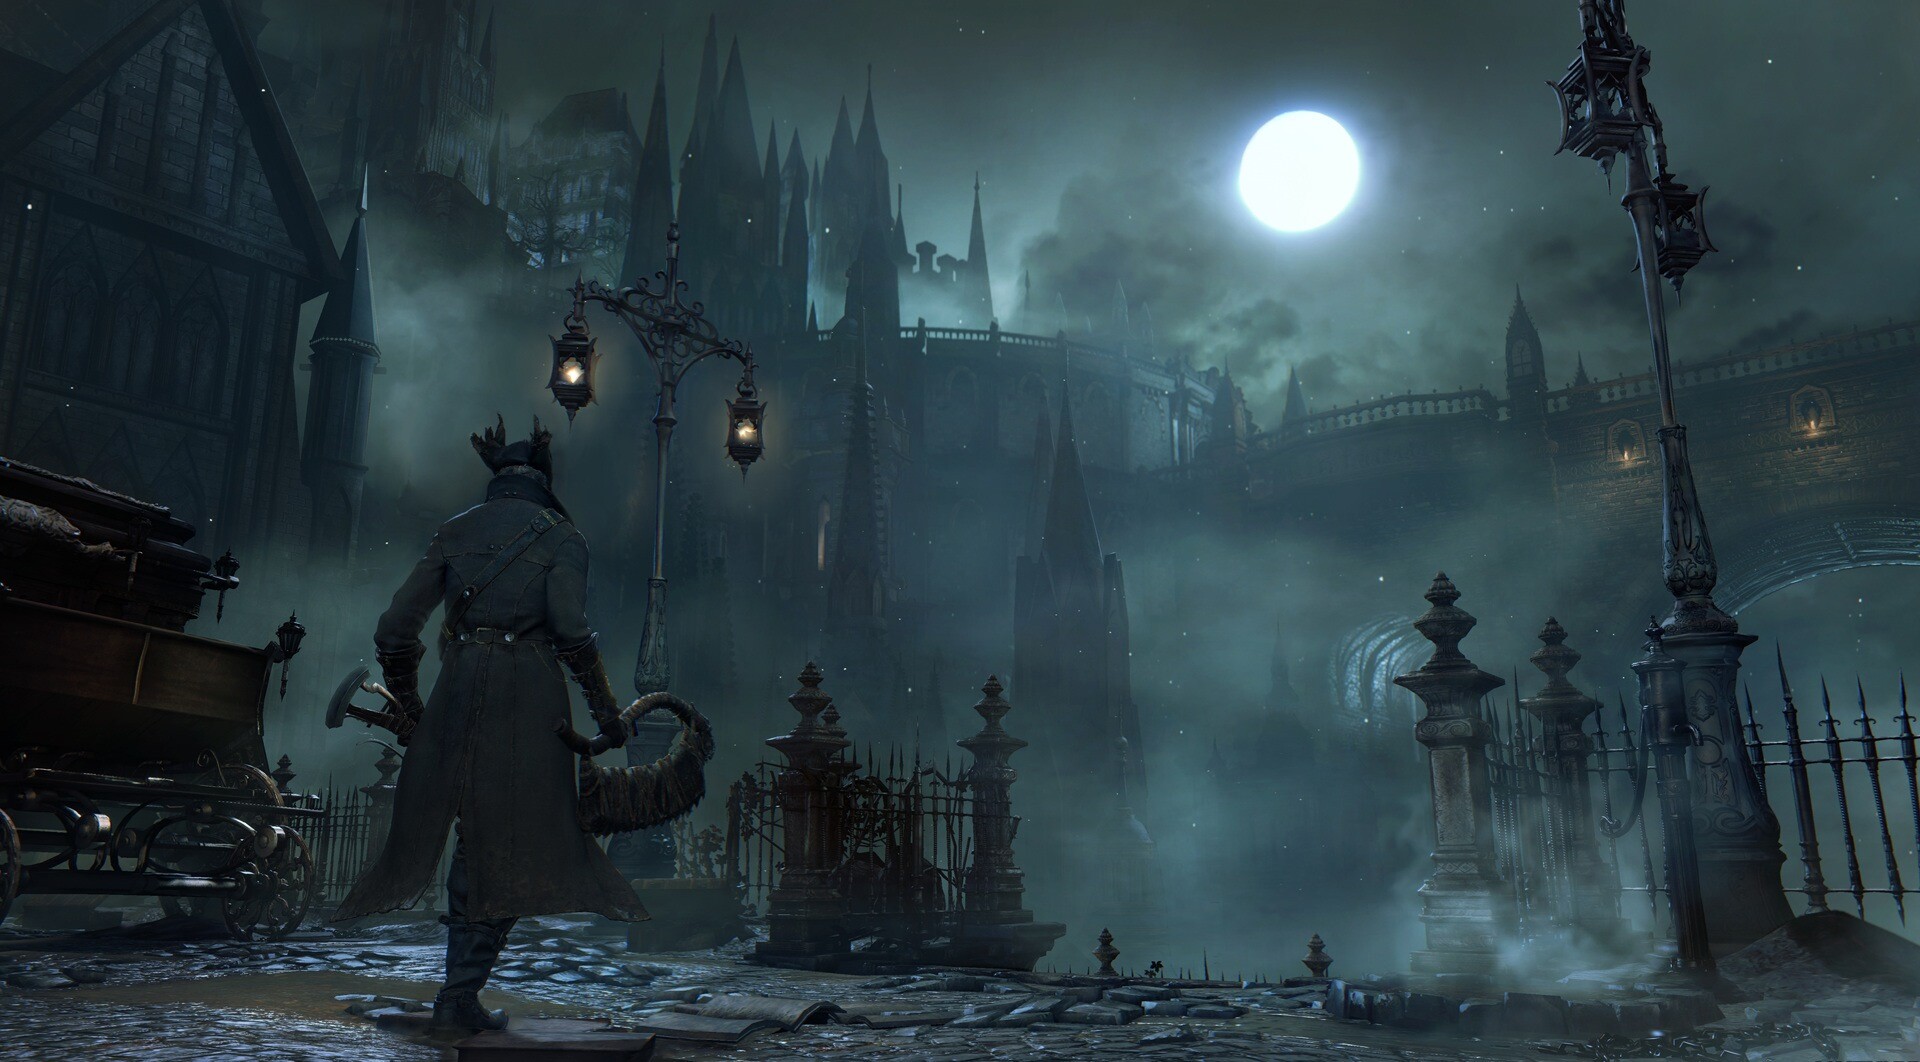 Bloodborne is one of the most popular Souls-like games to ever exist, and for good reasons | Image Source: IGDB